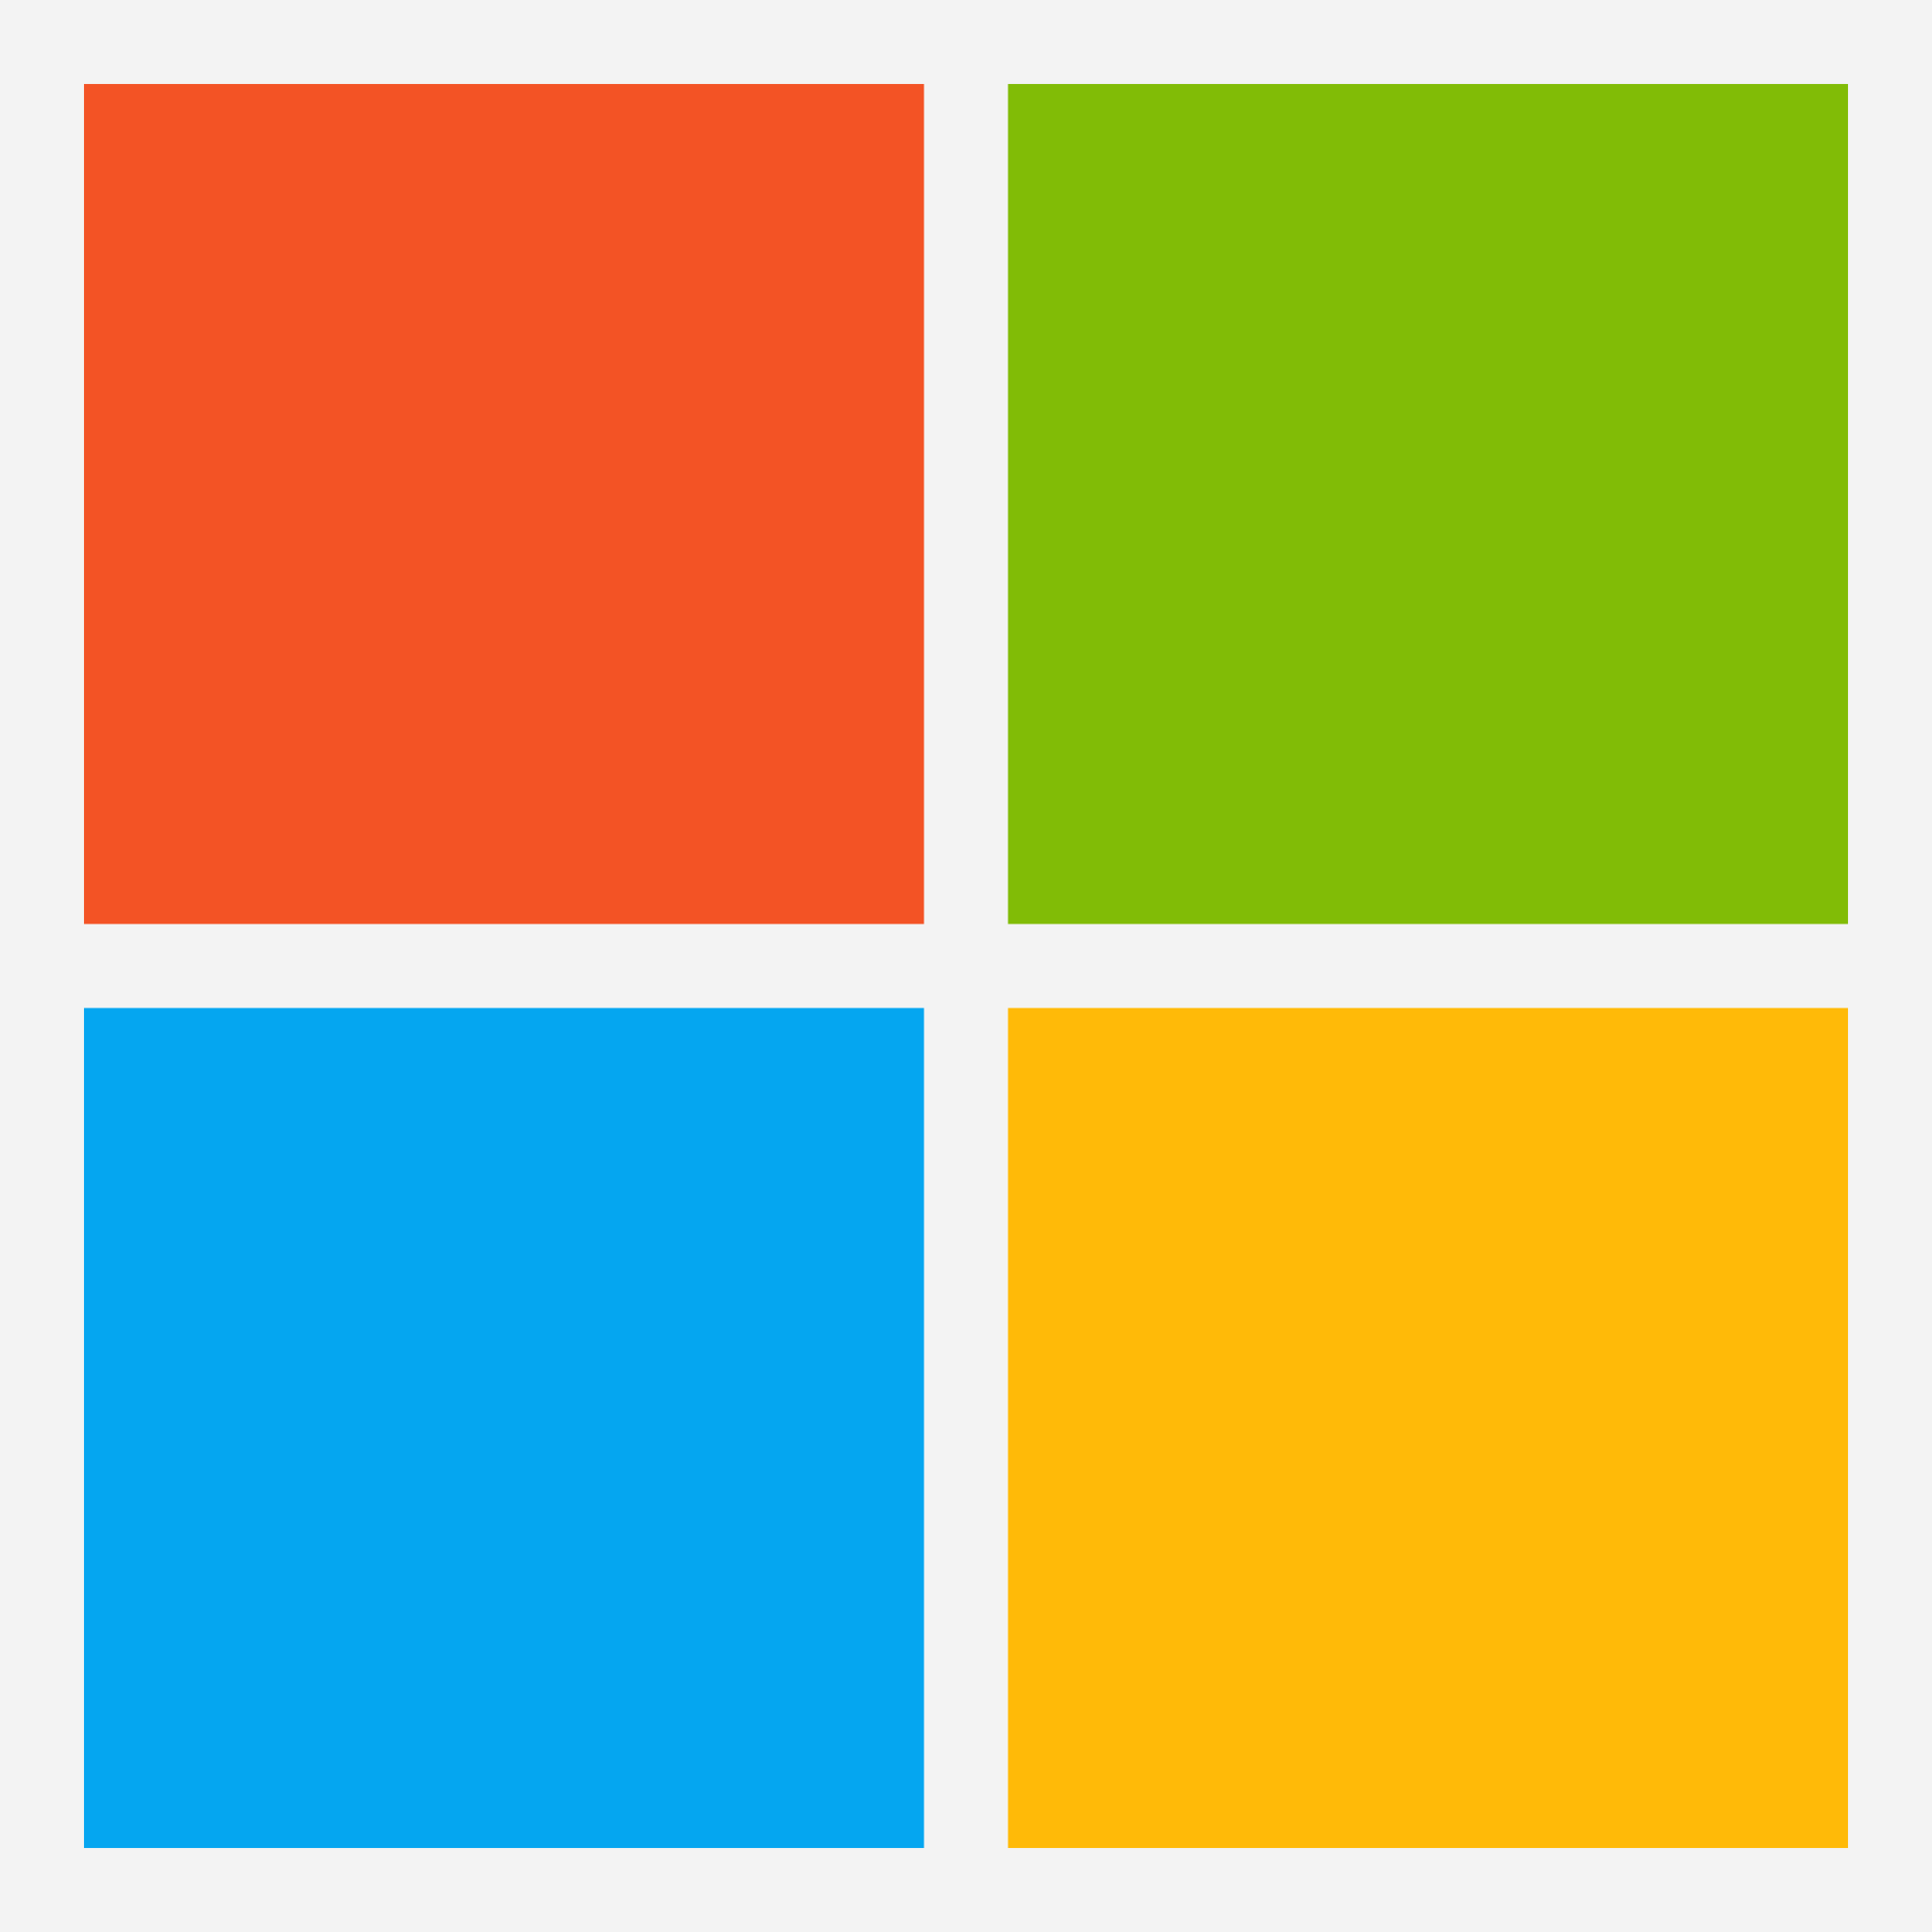 Microsoft windows logo, with four different colors